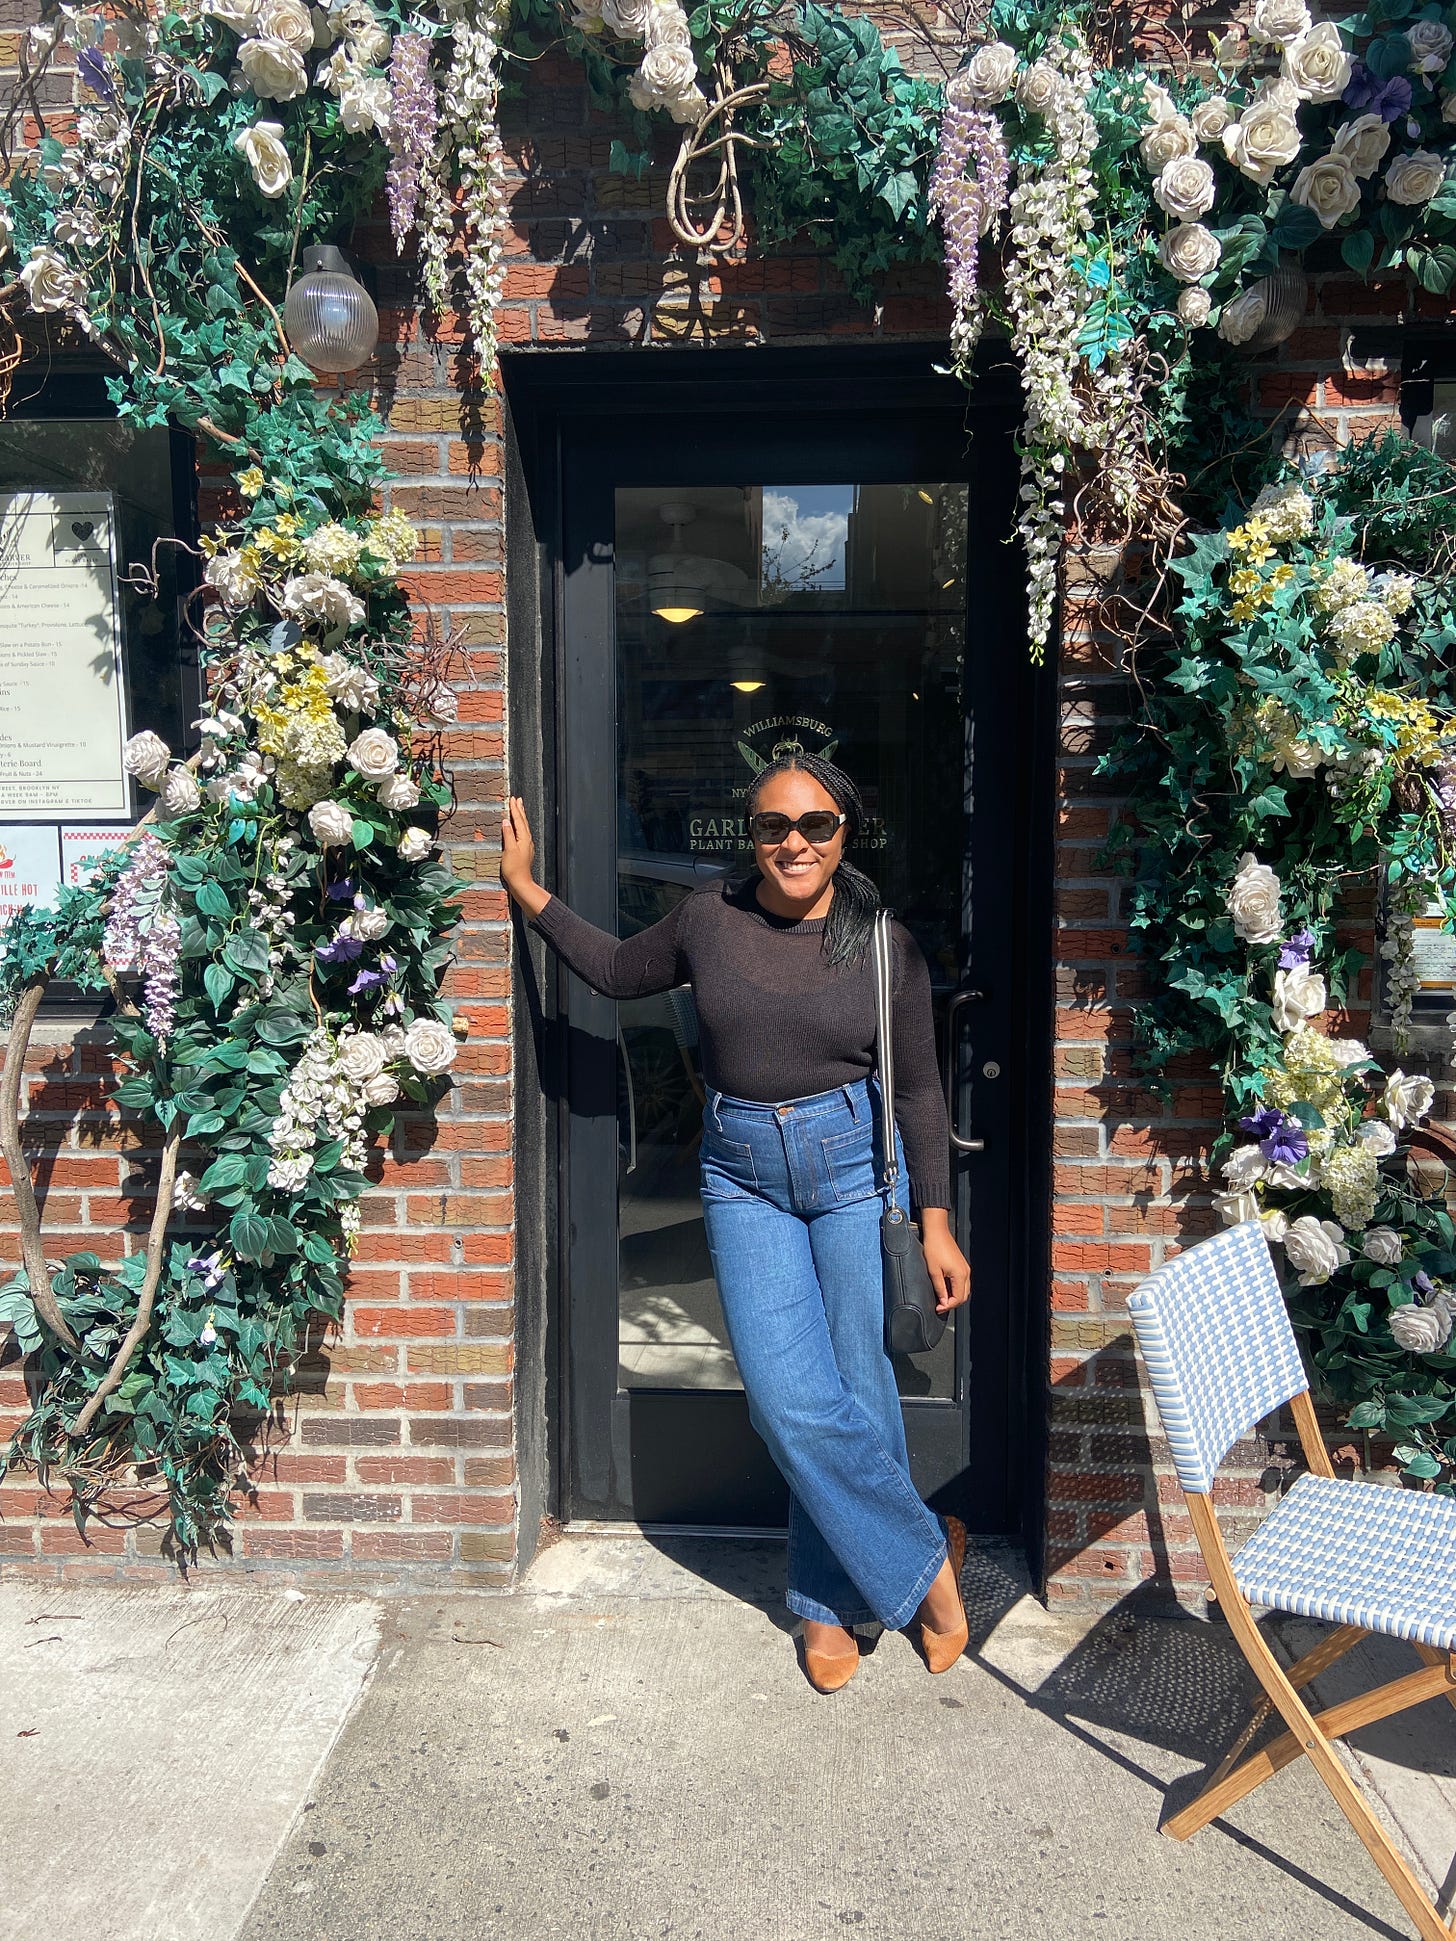 Alexa is leaning against a doorframe covered in a beautiful flower/leaf arch. The building is made of brick. Alexa is wearing a black sweater, flare blue jeans, and tan pointed flats. She has a black bag with a black and white striped strapped on her shoulder. She is wearing black sunglasses, and has her hair in a side ponytail. She is smiling at the camera.